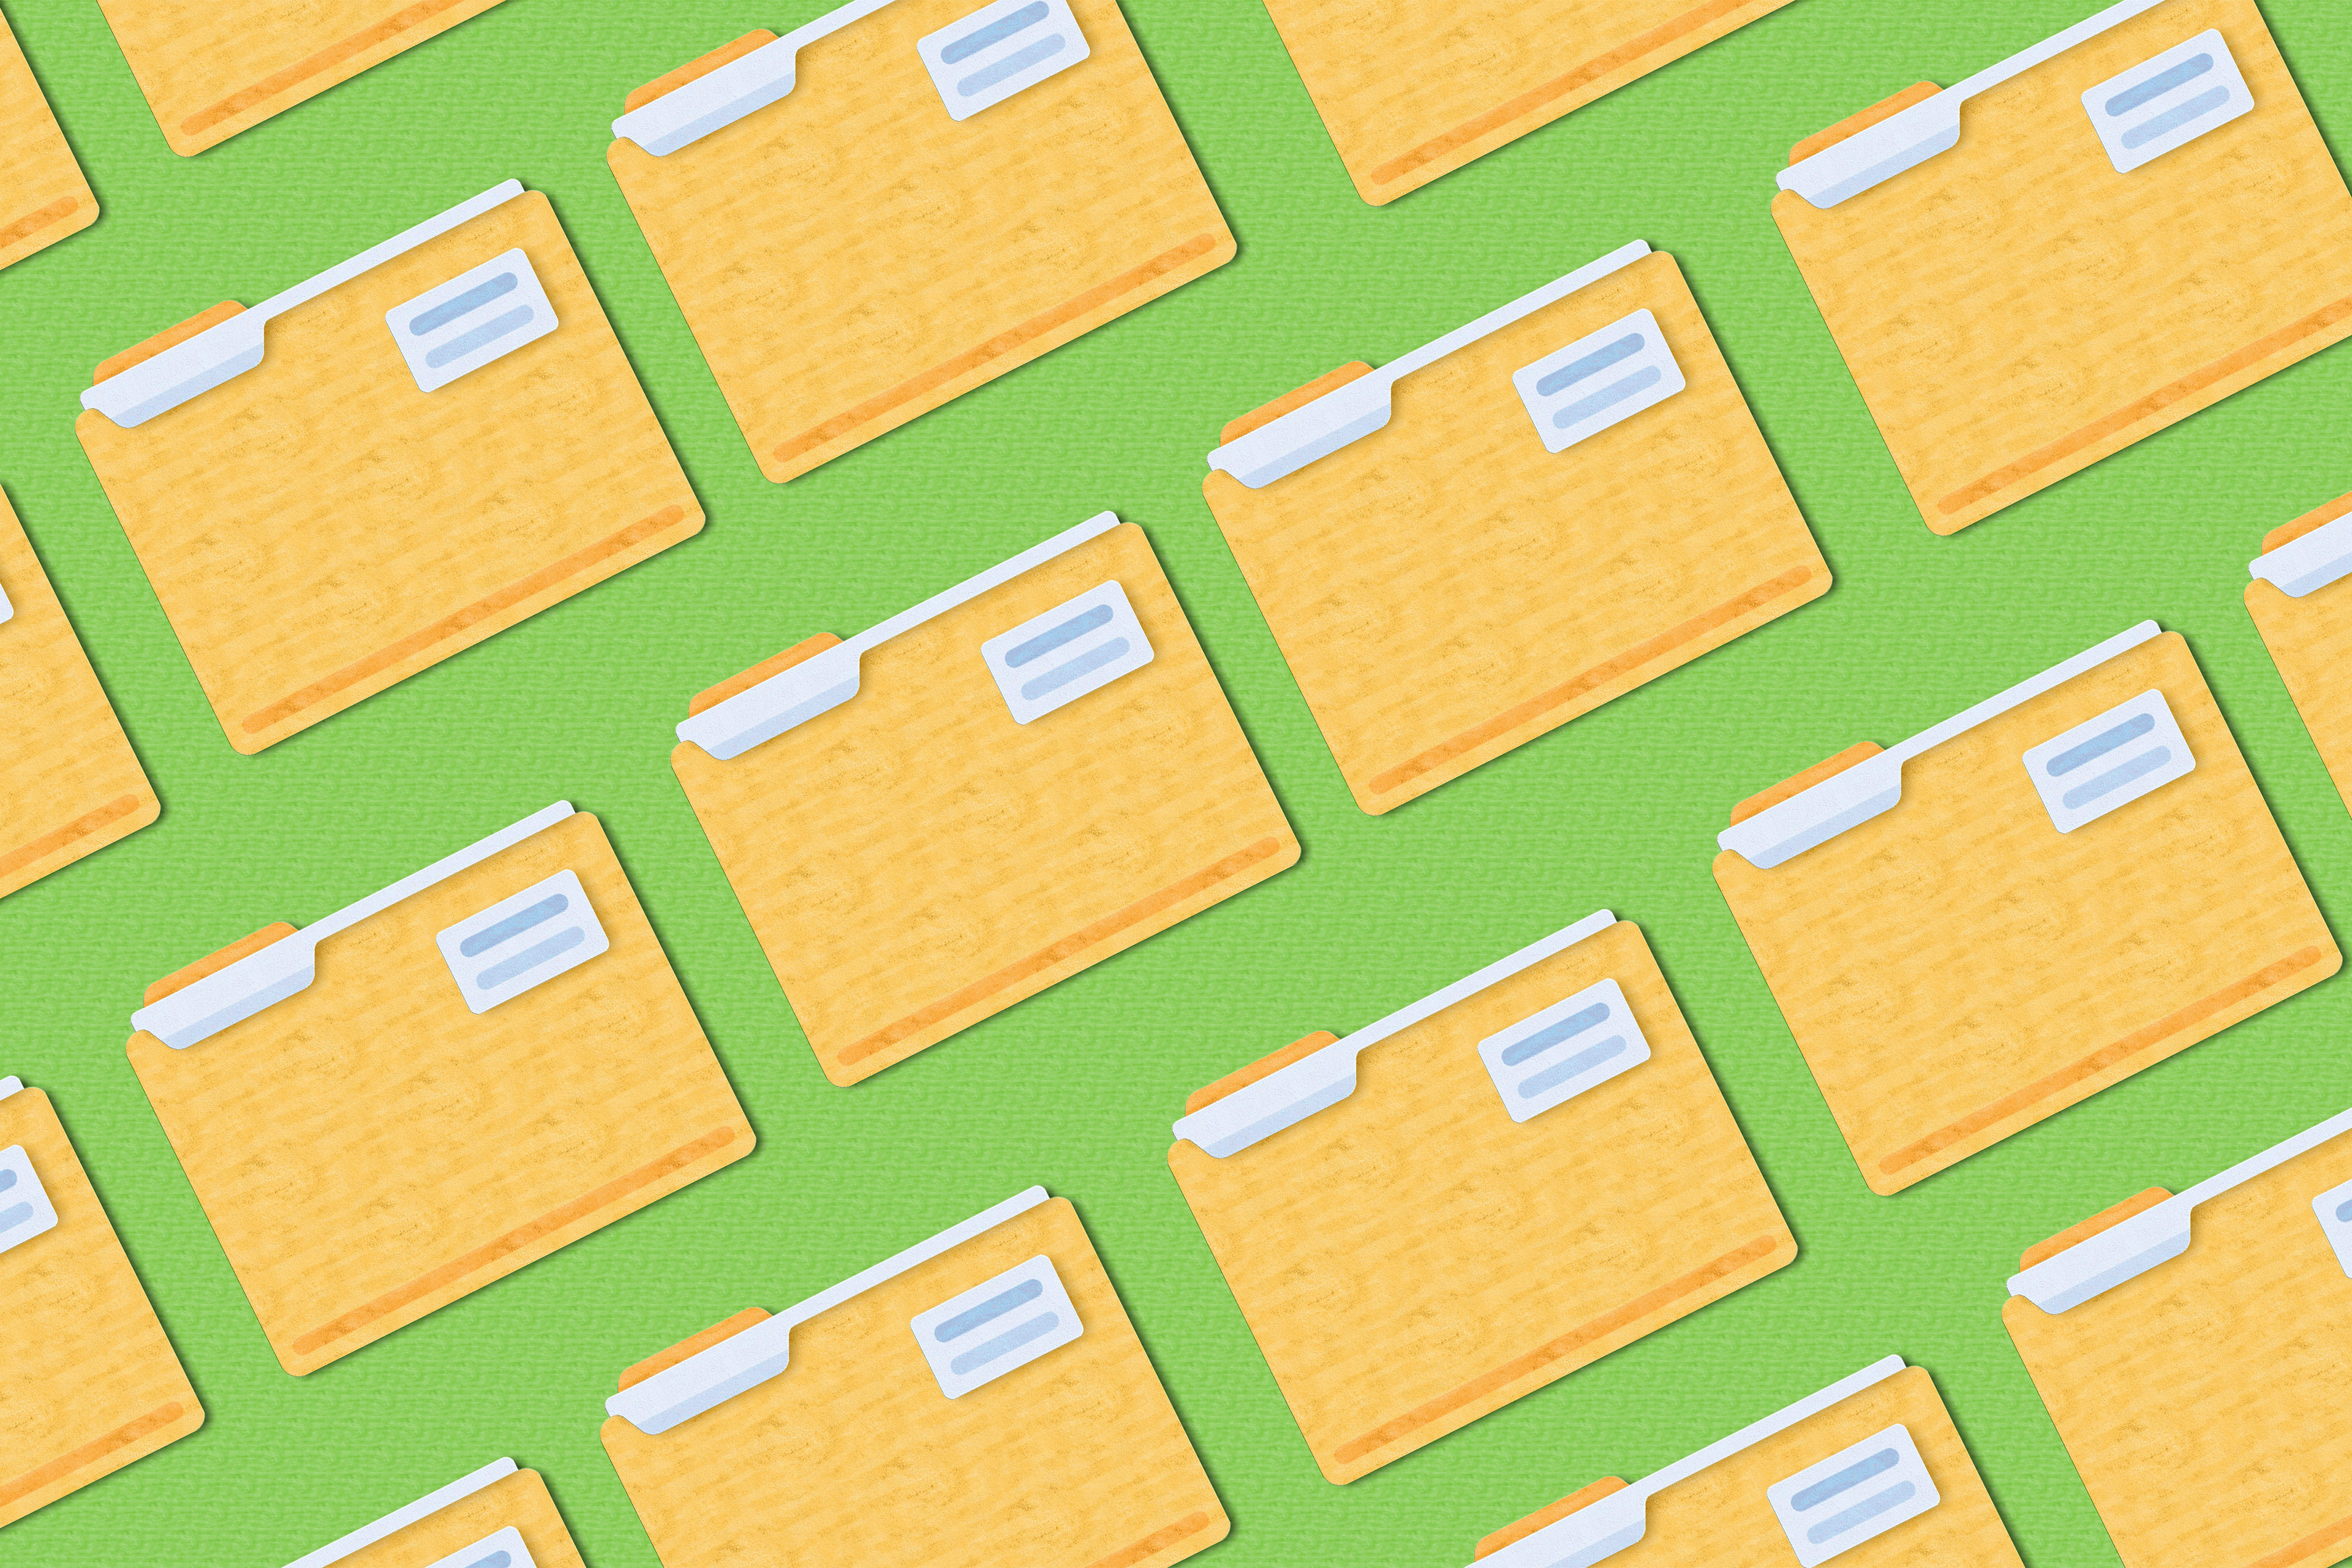 An illustration of file folders lying in a seamless pattern of rows.